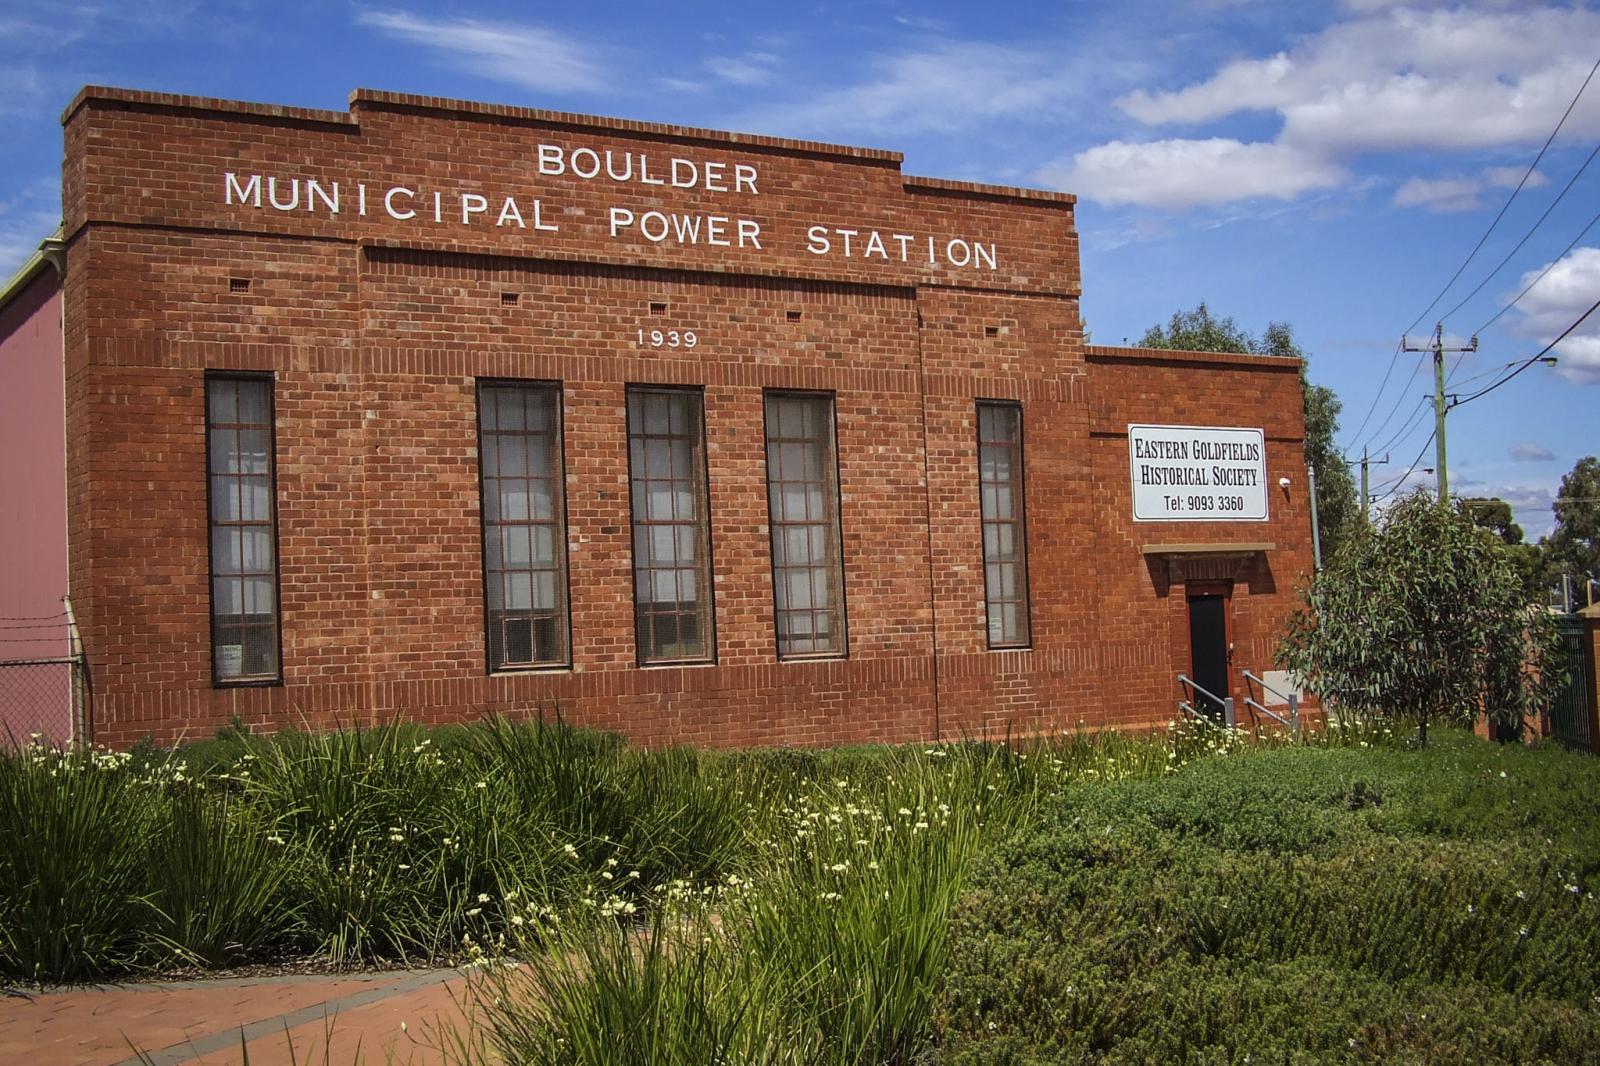 A rectangular red brick building with white lettering "BOULDER MUNICIPAL POWER STATION" across the top. To the right, above the door, is a sign reading "Eastern Goldfields Historical Society". In the foreground are green gardens either side of a brick path.